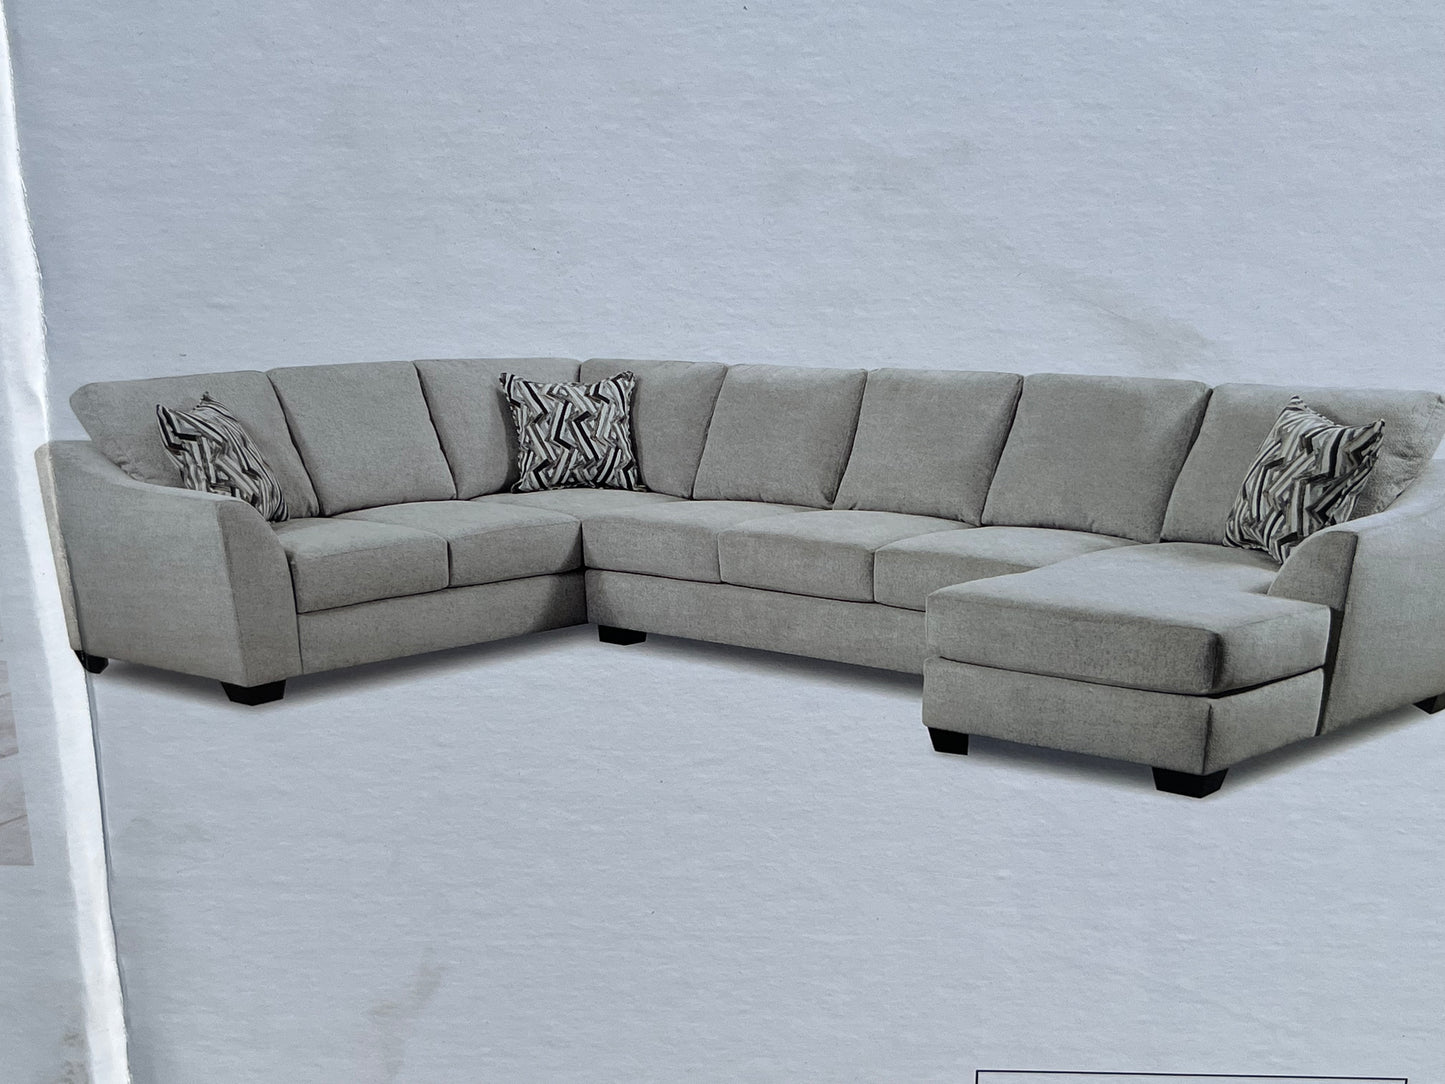 Lane Sectional LIMITED TIME